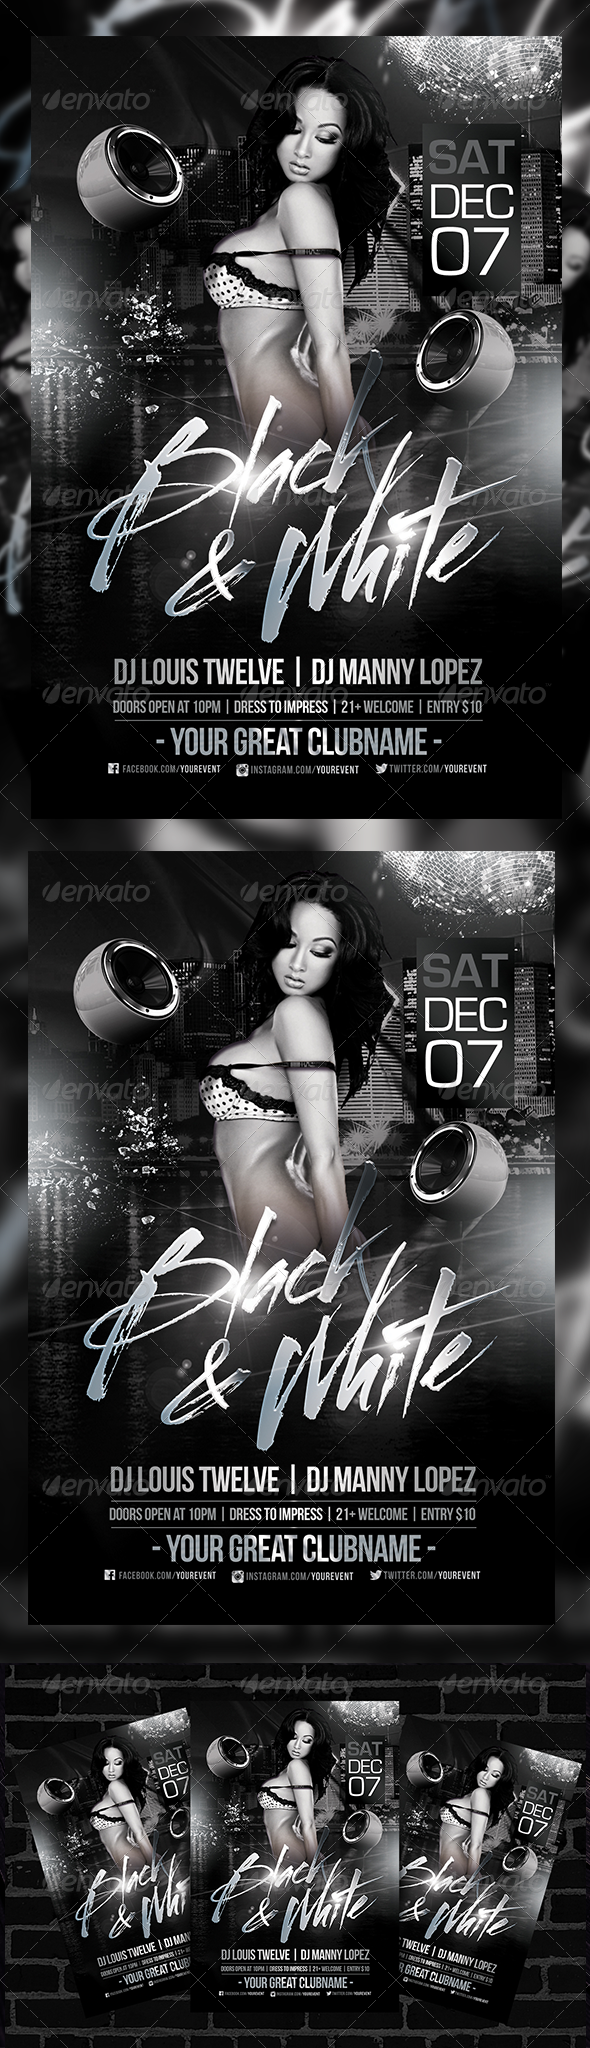 Black and White 3 | Flyer Template